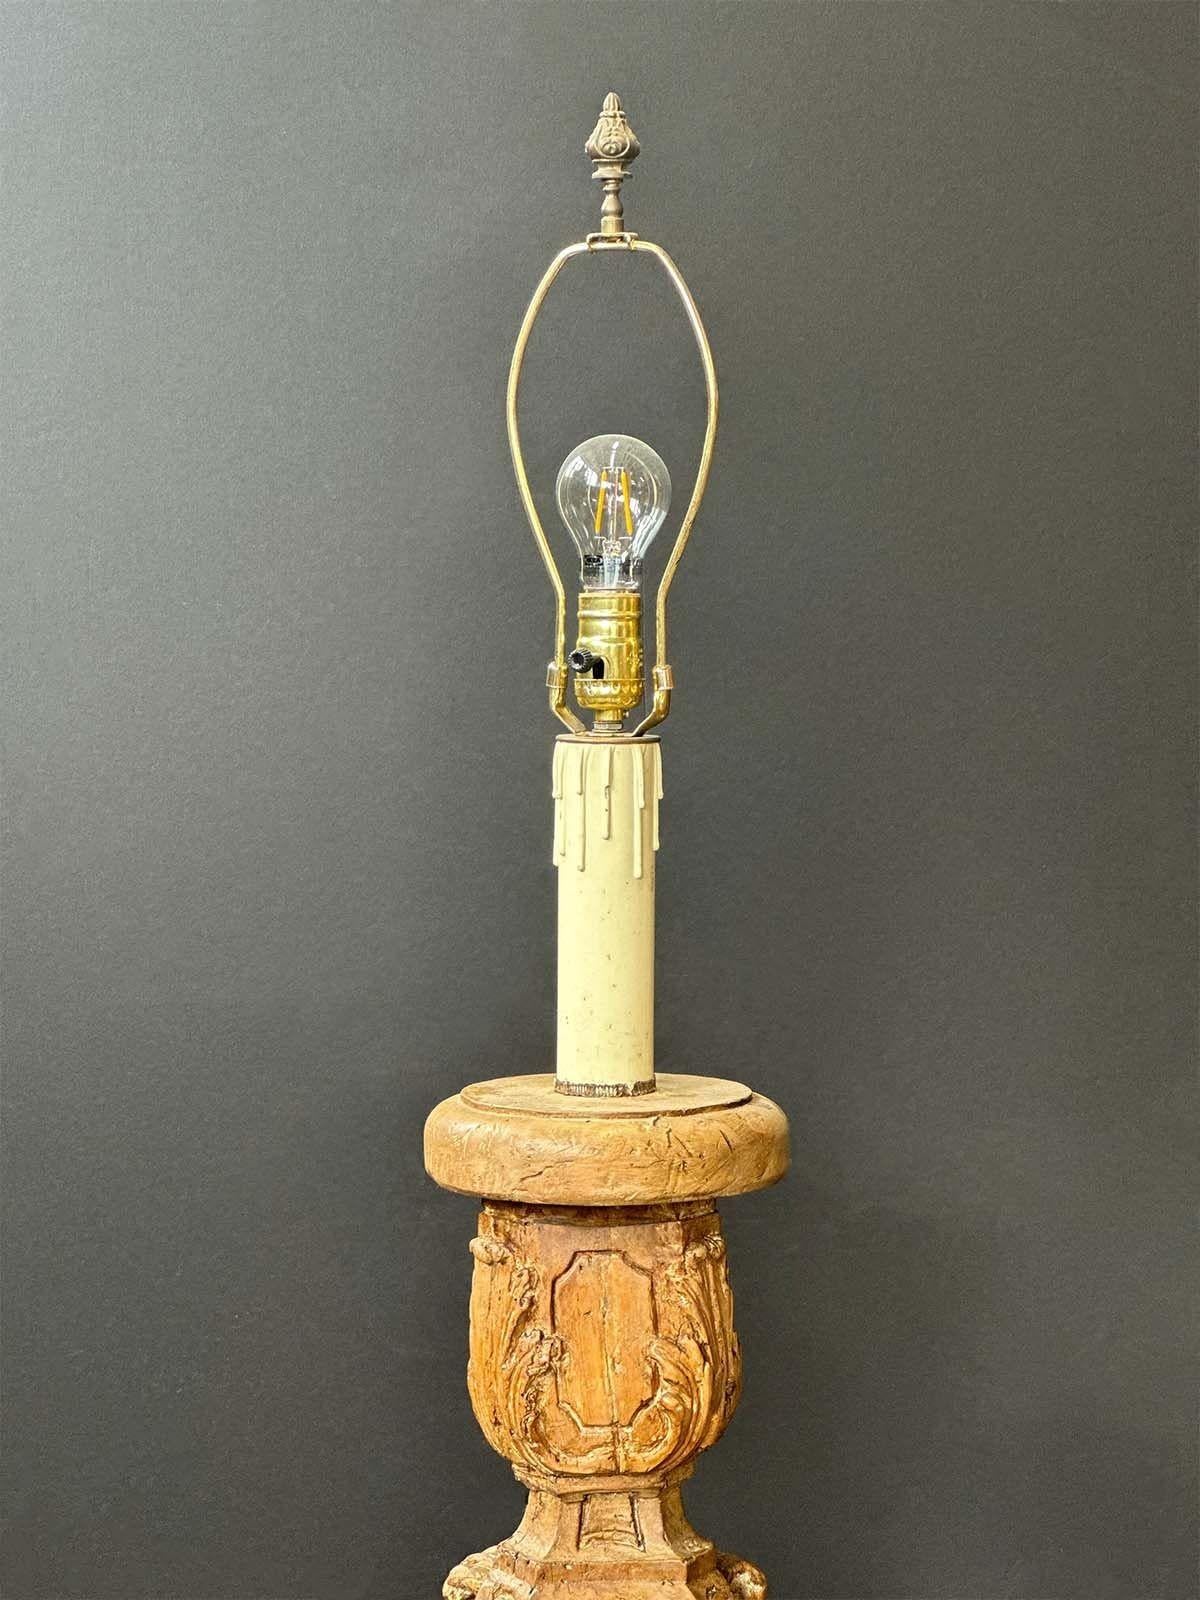 Stunning Italian hand-carved floor lamp from the 18th Century. UL Listed (rewired to fit US Standards). 
Dimensions:
76.5